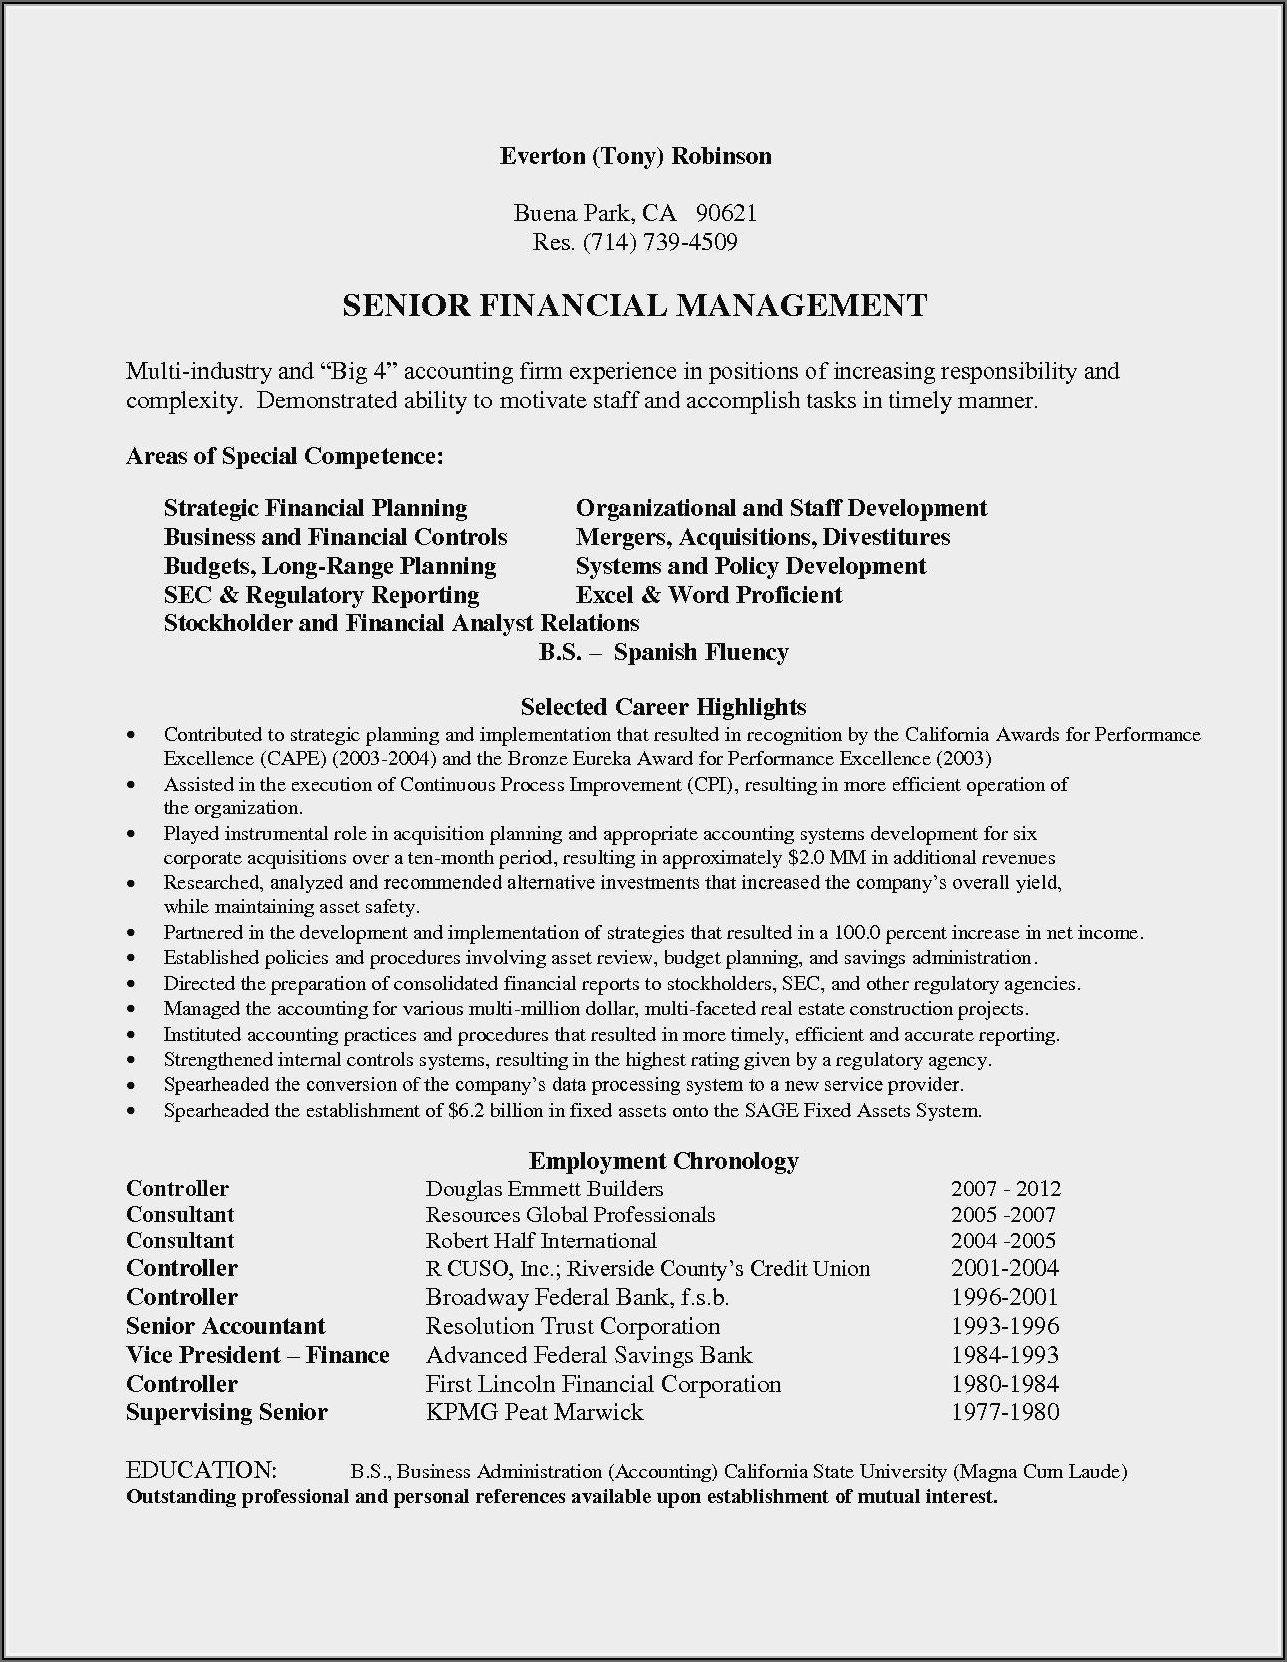 Professional Summary For Accountant Resume